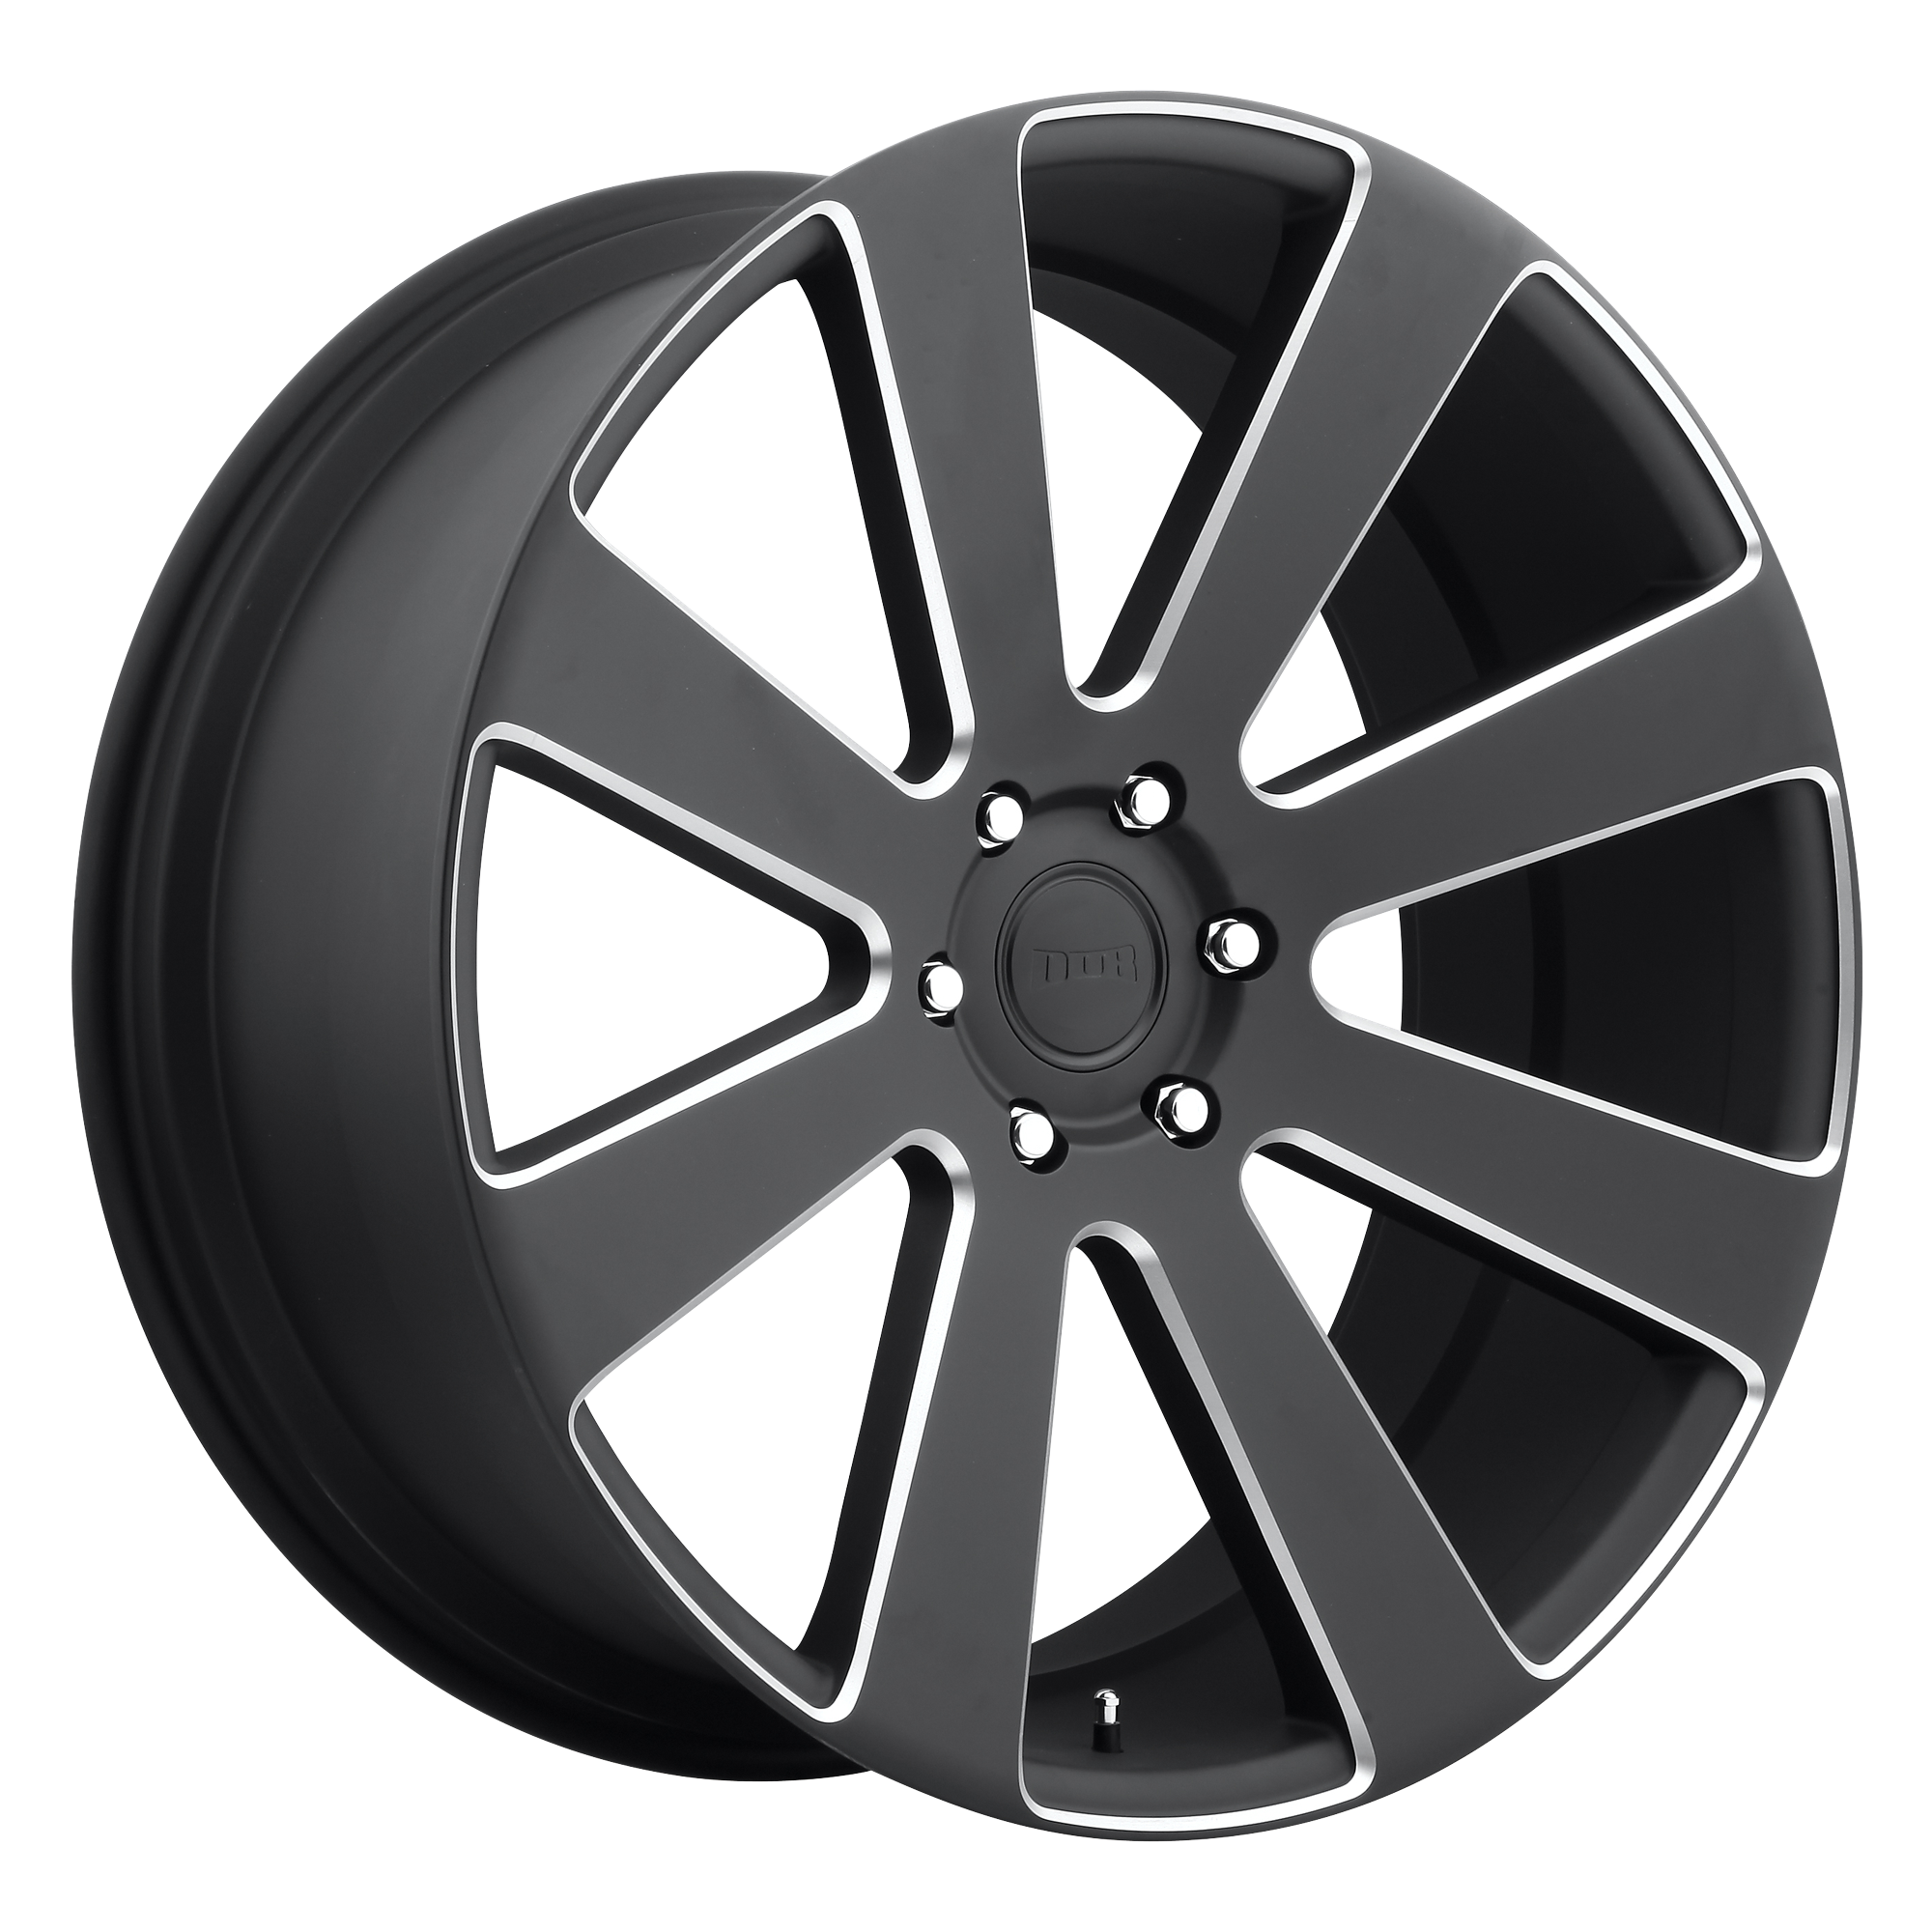 8-BALL 24x10 6x139.70 MATTE BLACK MILLED (20 mm) - Tires and Engine Performance